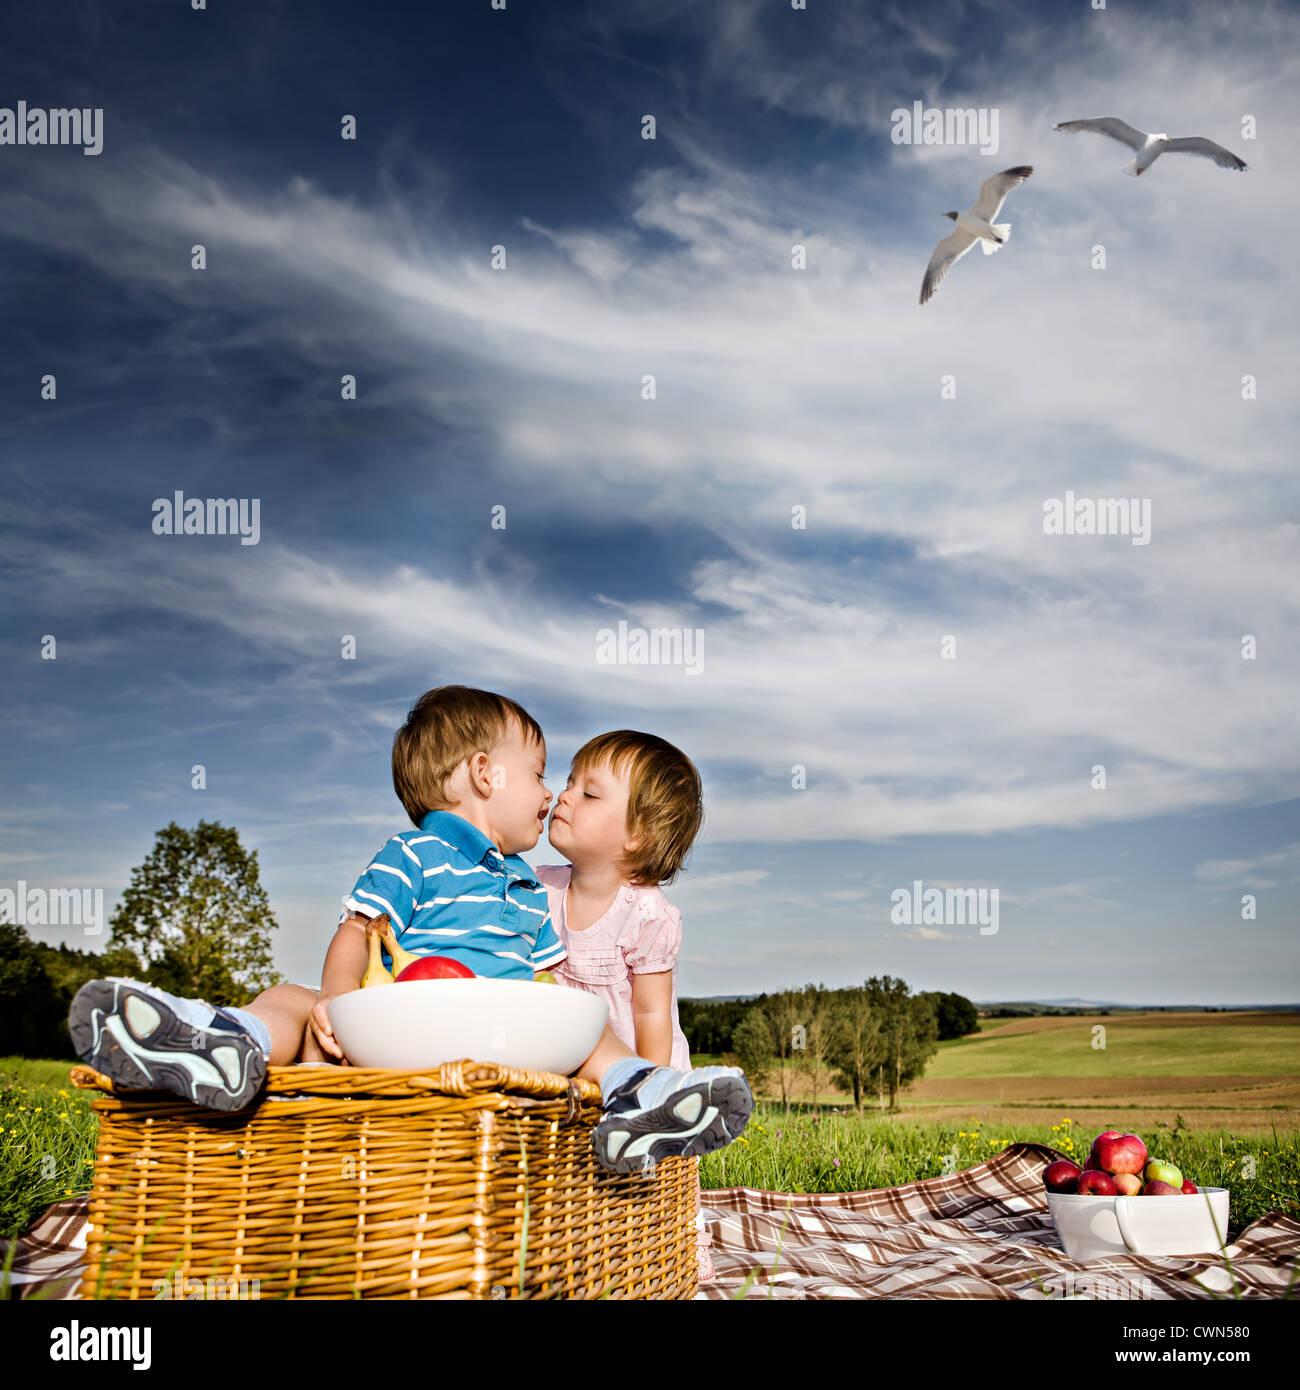 Twins by girl boy Stock Vector Images - Page 2 - Alamy